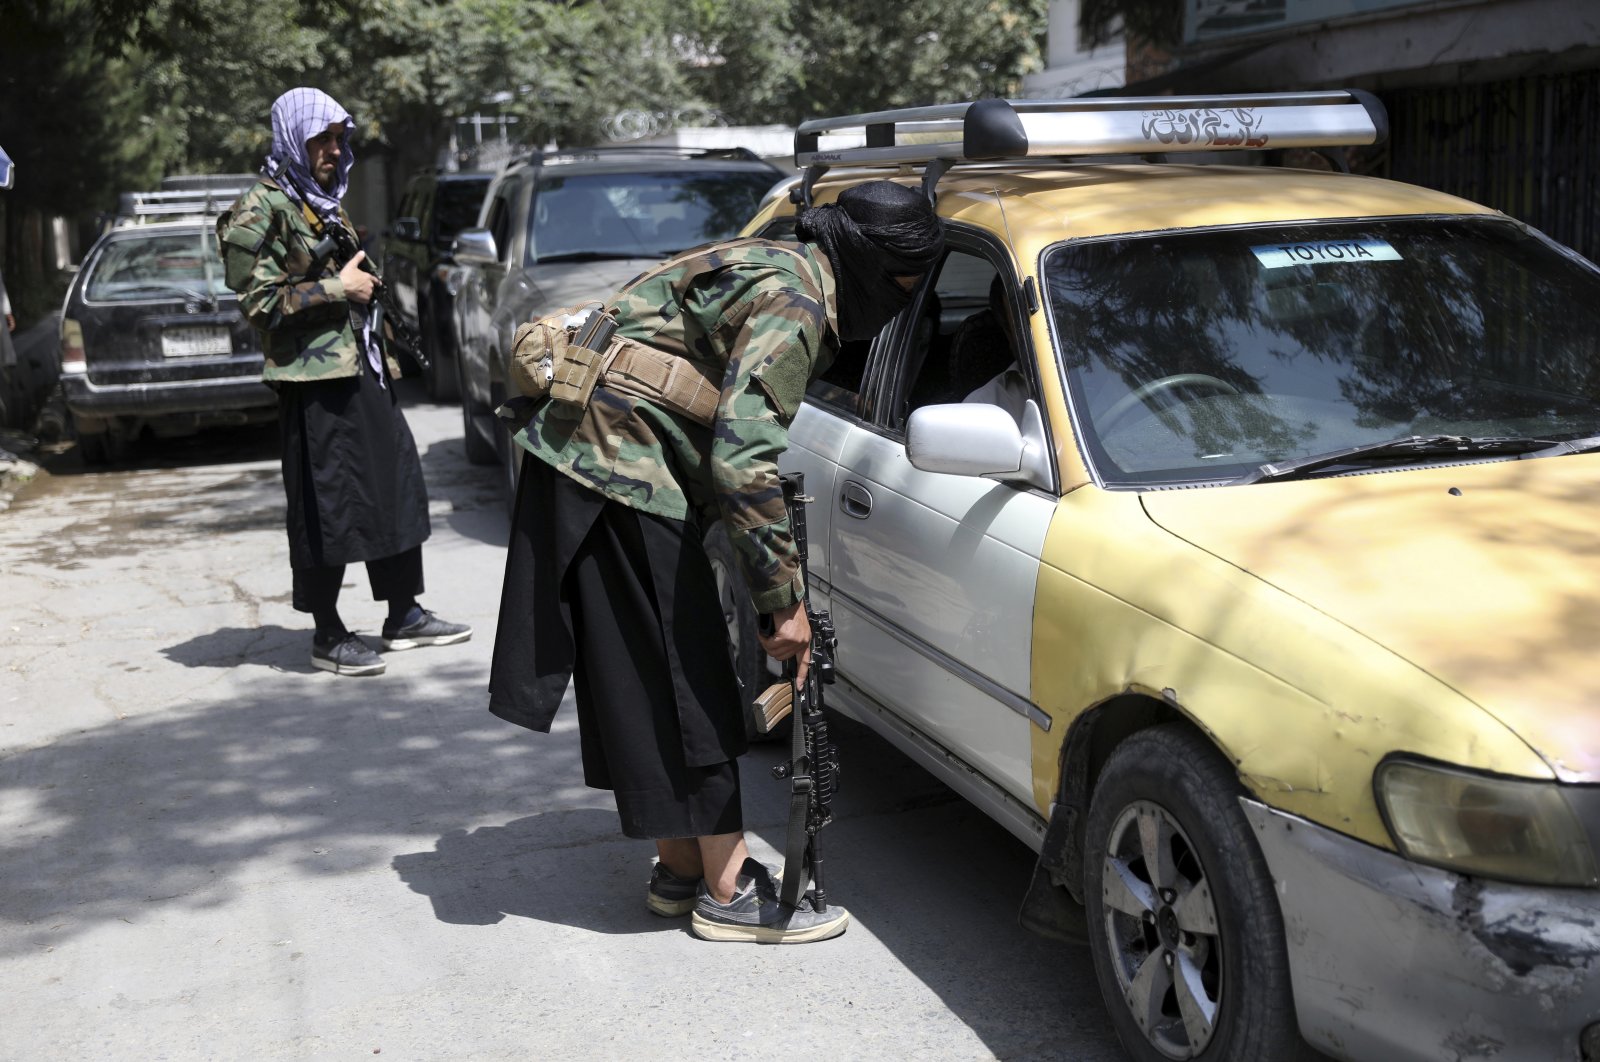 Taliban fighters search a vehicle at a checkpoint on the road in the Wazir Akbar Khan neighborhood in the city of Kabul, Afghanistan, Sunday, Aug. 22, 2021. (AP Photo)